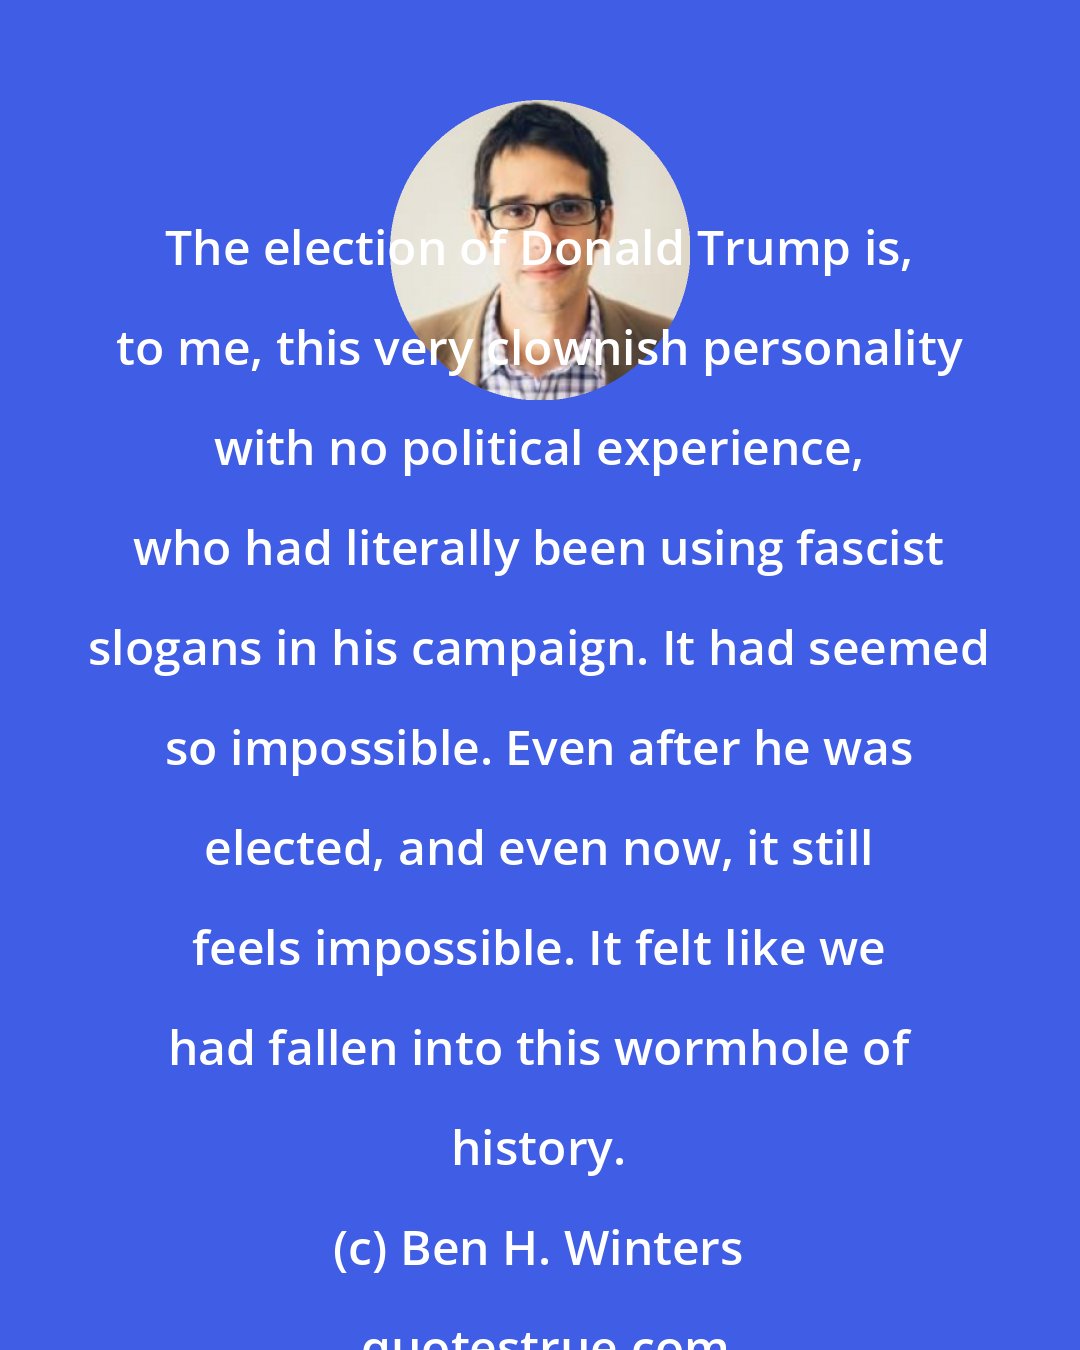 Ben H. Winters: The election of Donald Trump is, to me, this very clownish personality with no political experience, who had literally been using fascist slogans in his campaign. It had seemed so impossible. Even after he was elected, and even now, it still feels impossible. It felt like we had fallen into this wormhole of history.